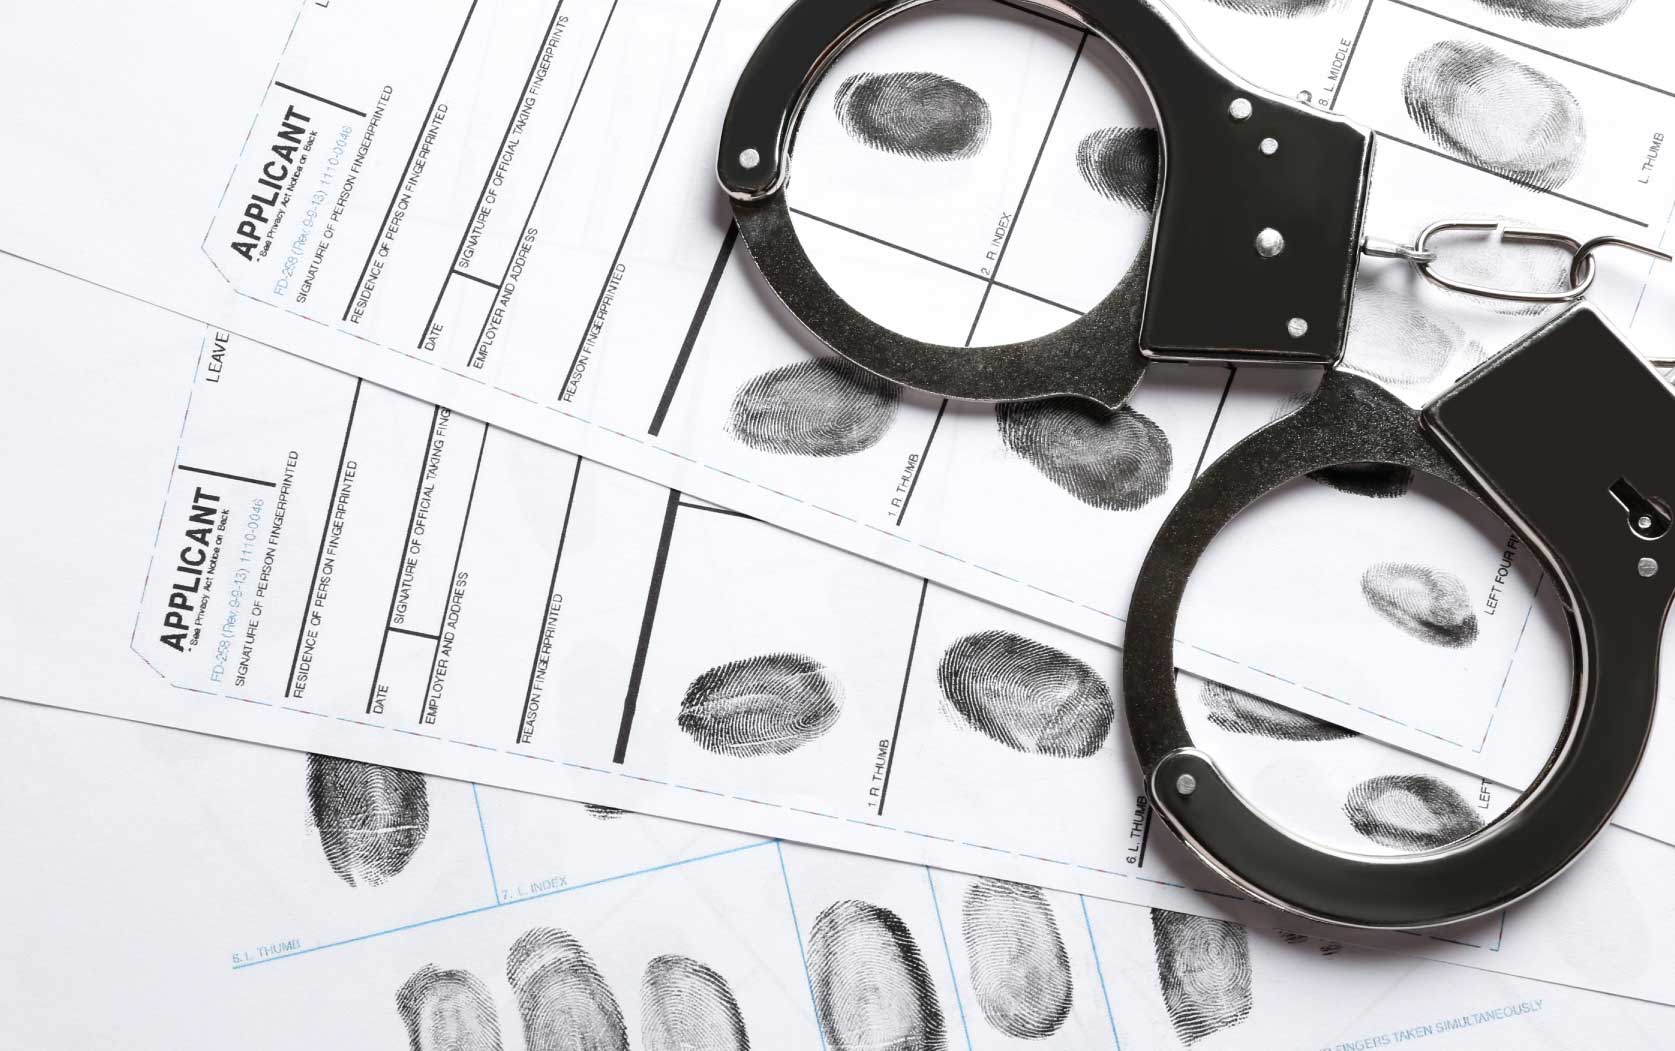 How Do I Get a Criminal Record Expunged?